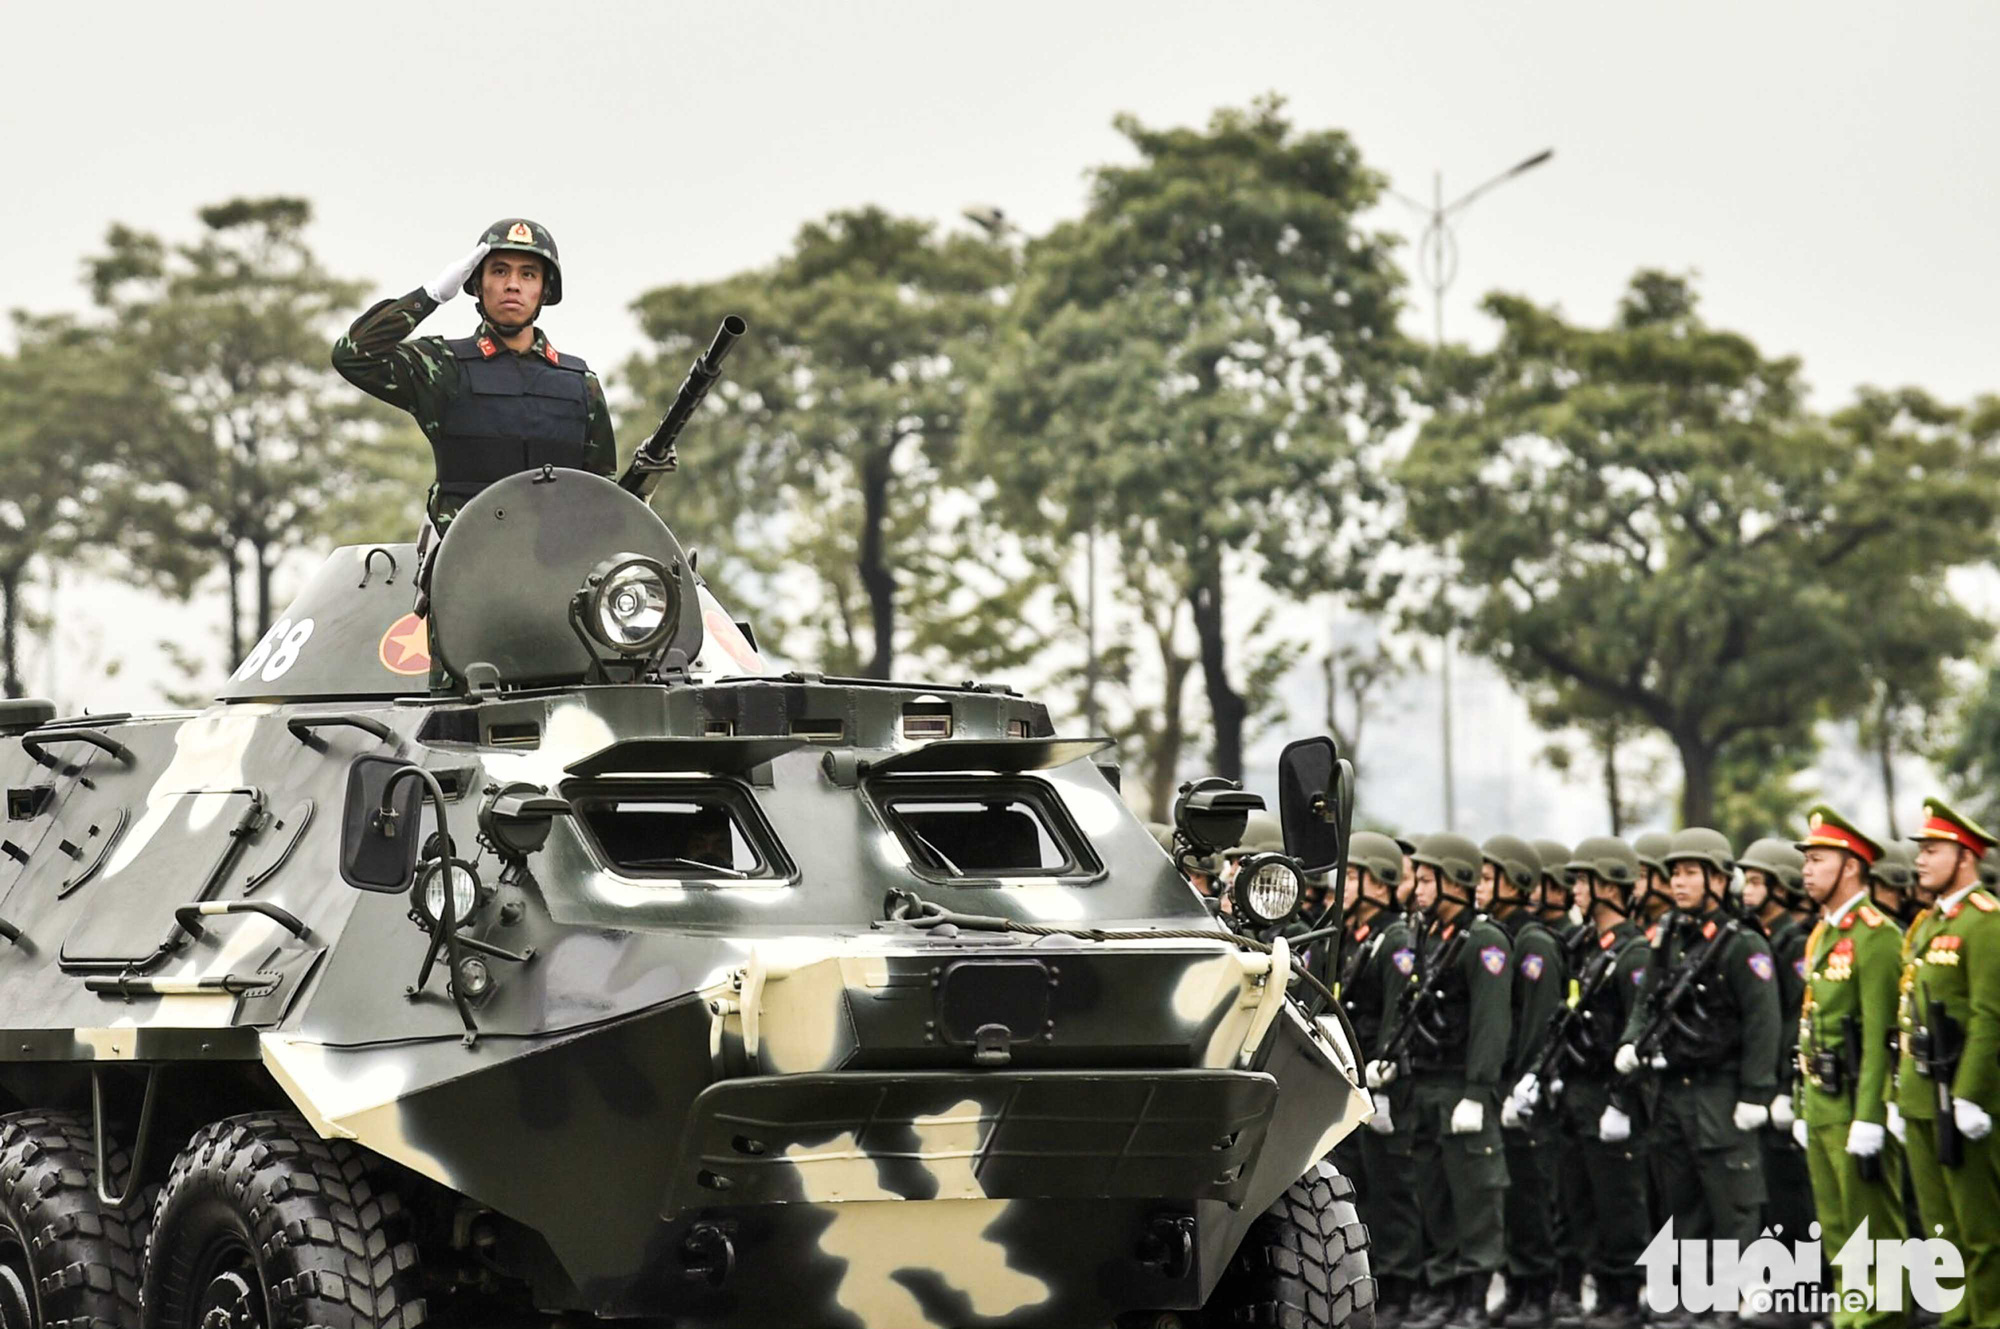 An armored vehicle is pictured during the parade in Hanoi, January 10, 2021. Photo: Quang Minh / Tuoi Tre